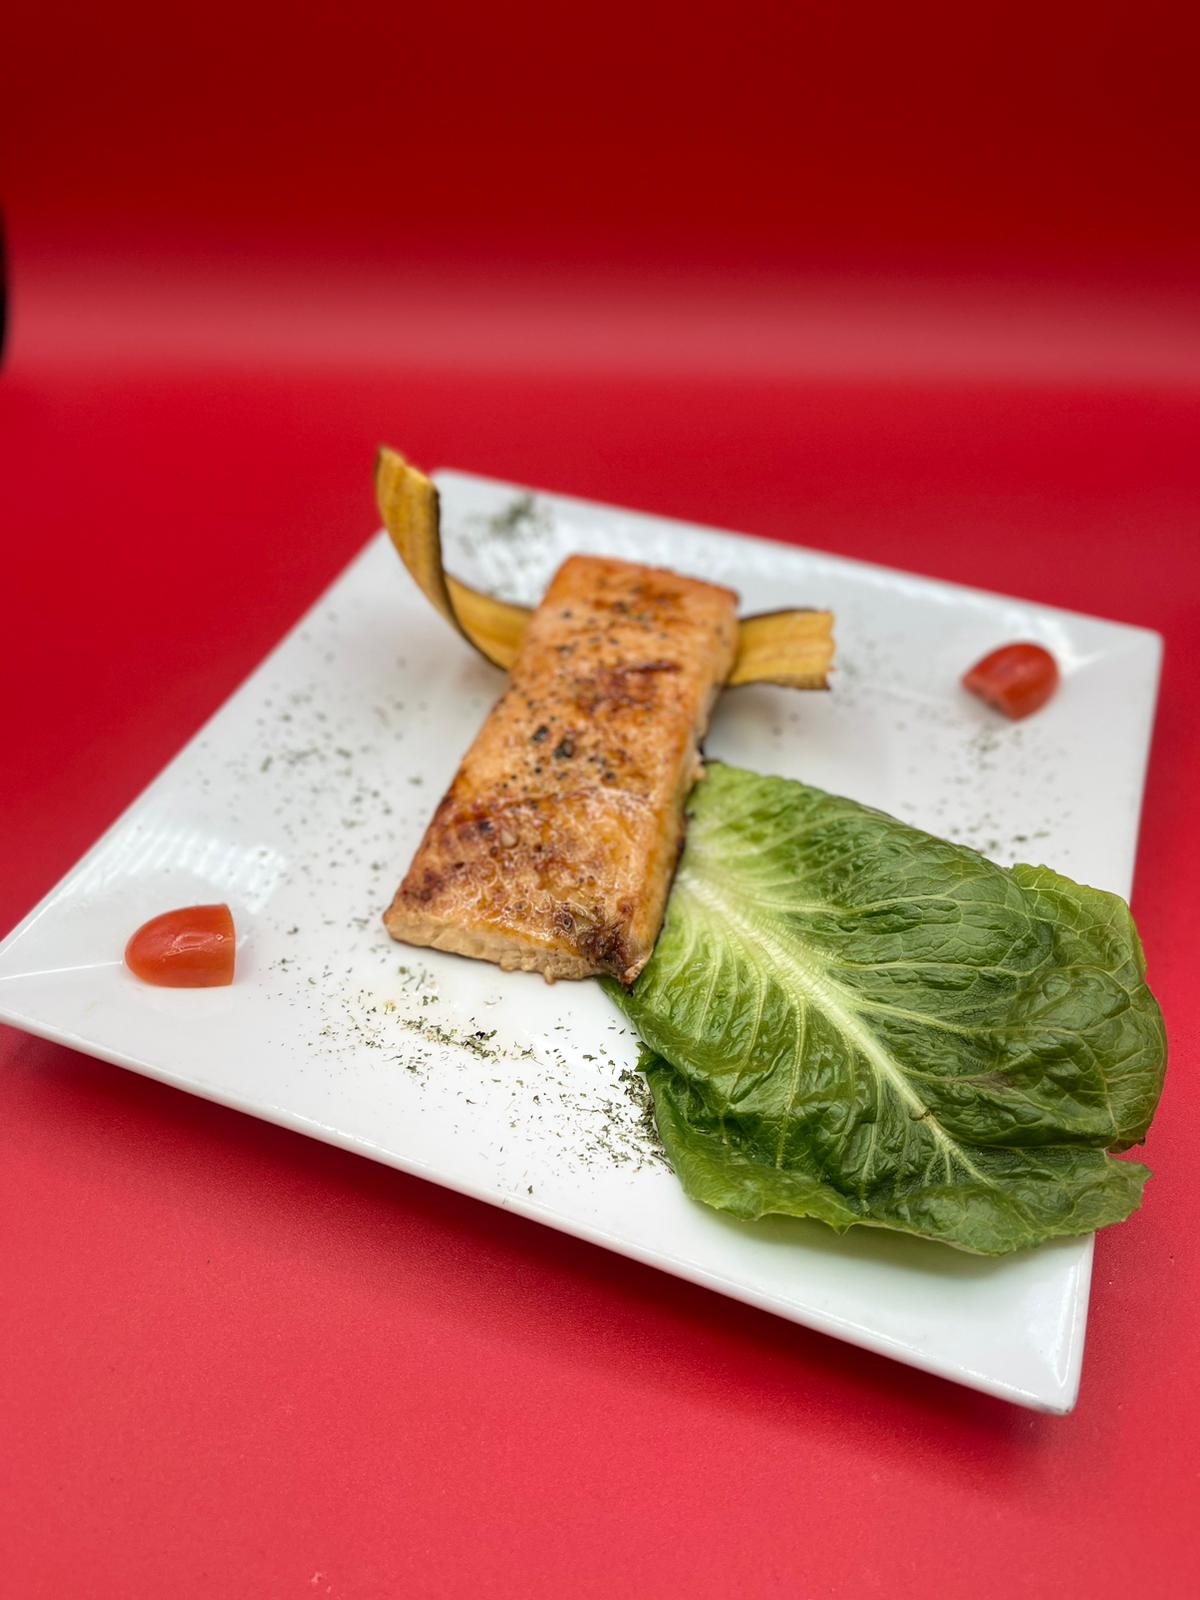 A plate with salmon and lettuce on it.